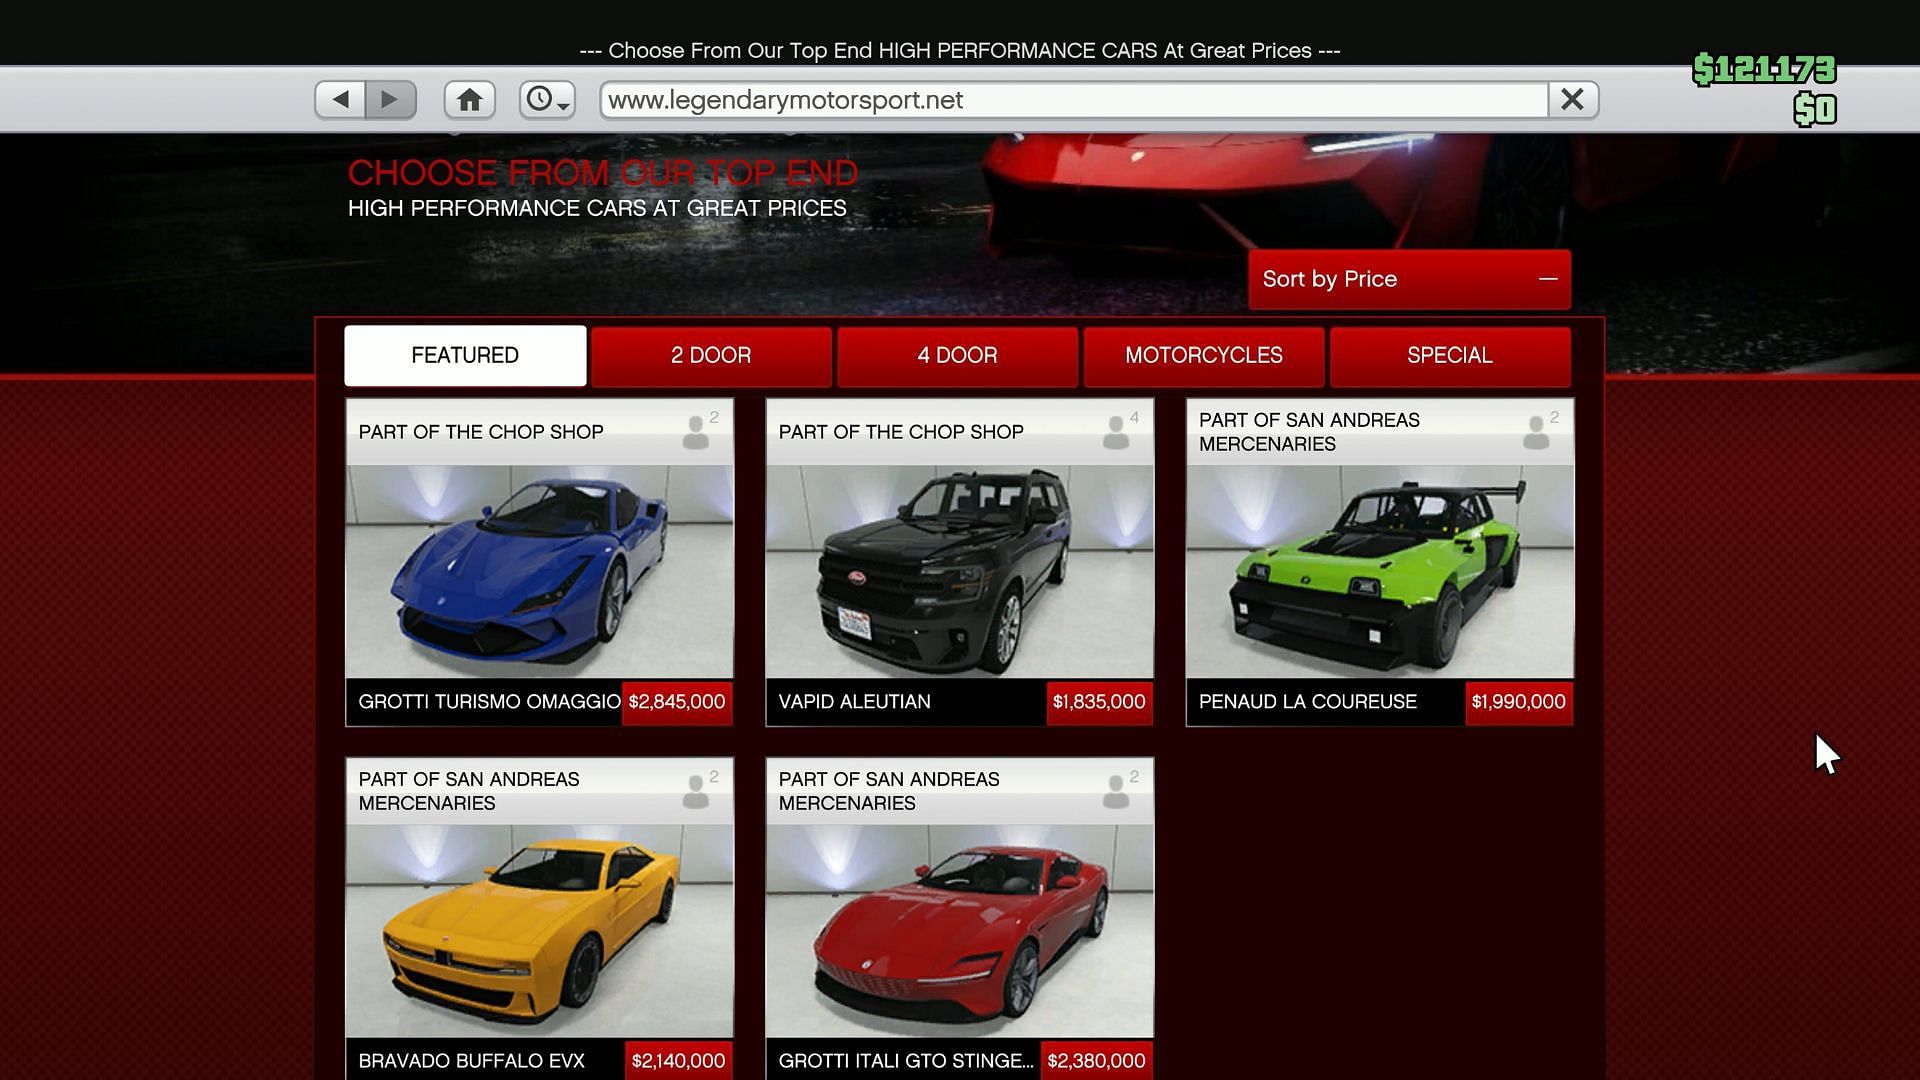 All new vehicles on the Legendary Motorsport website in Grand Theft Auto Online (Image via X/@morsmutual_)